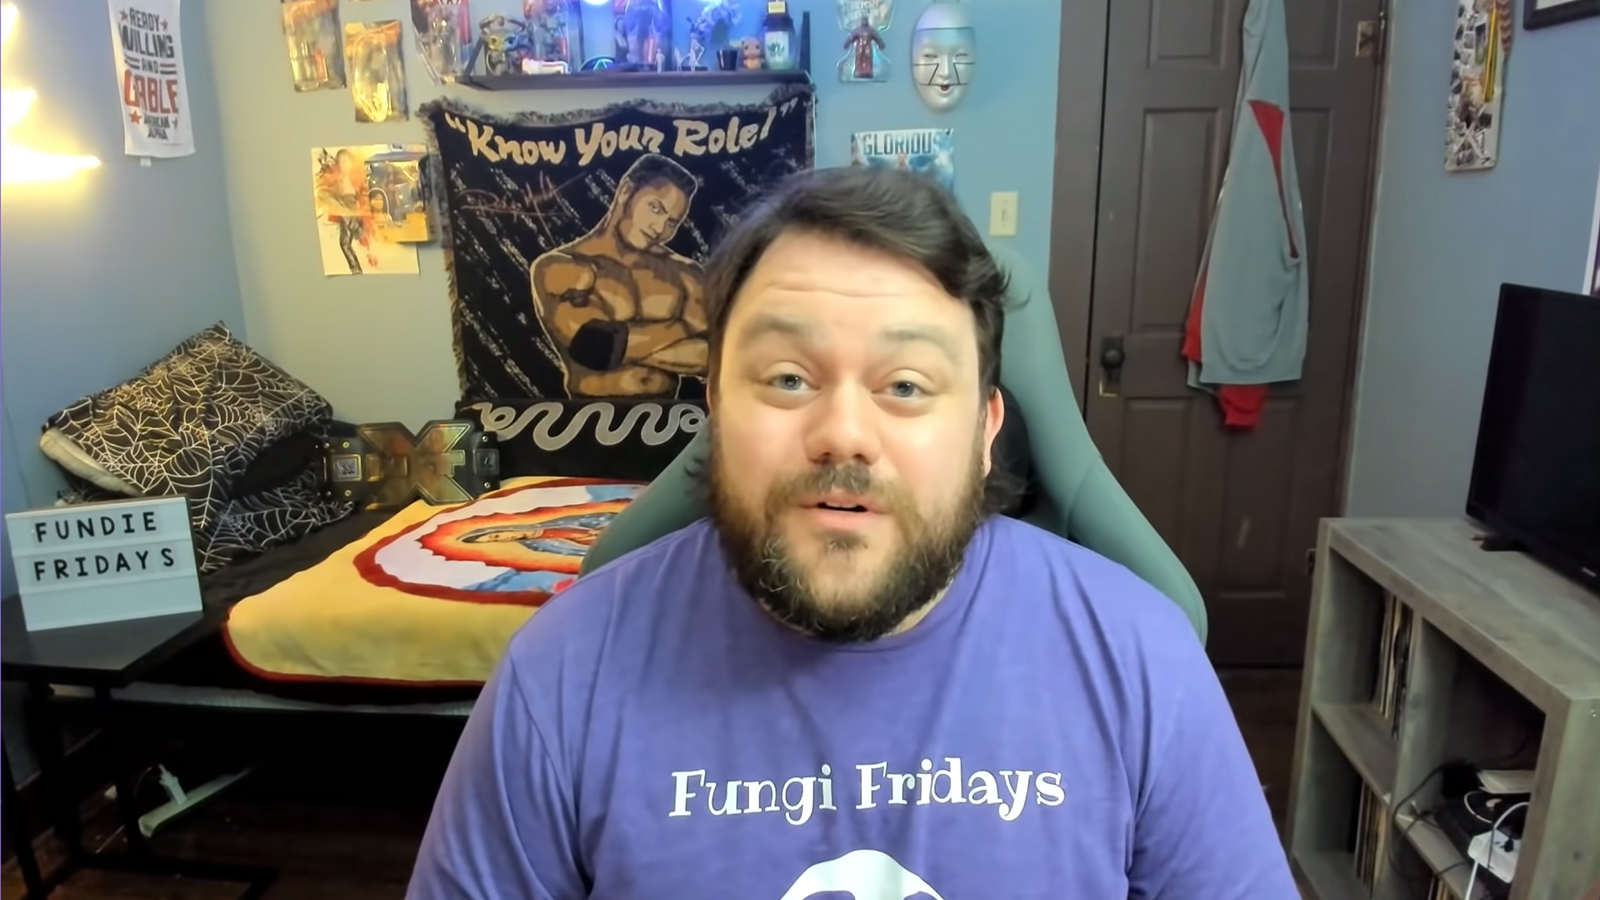 James Bryant records a Fundie Fridays episode. Video screen grab